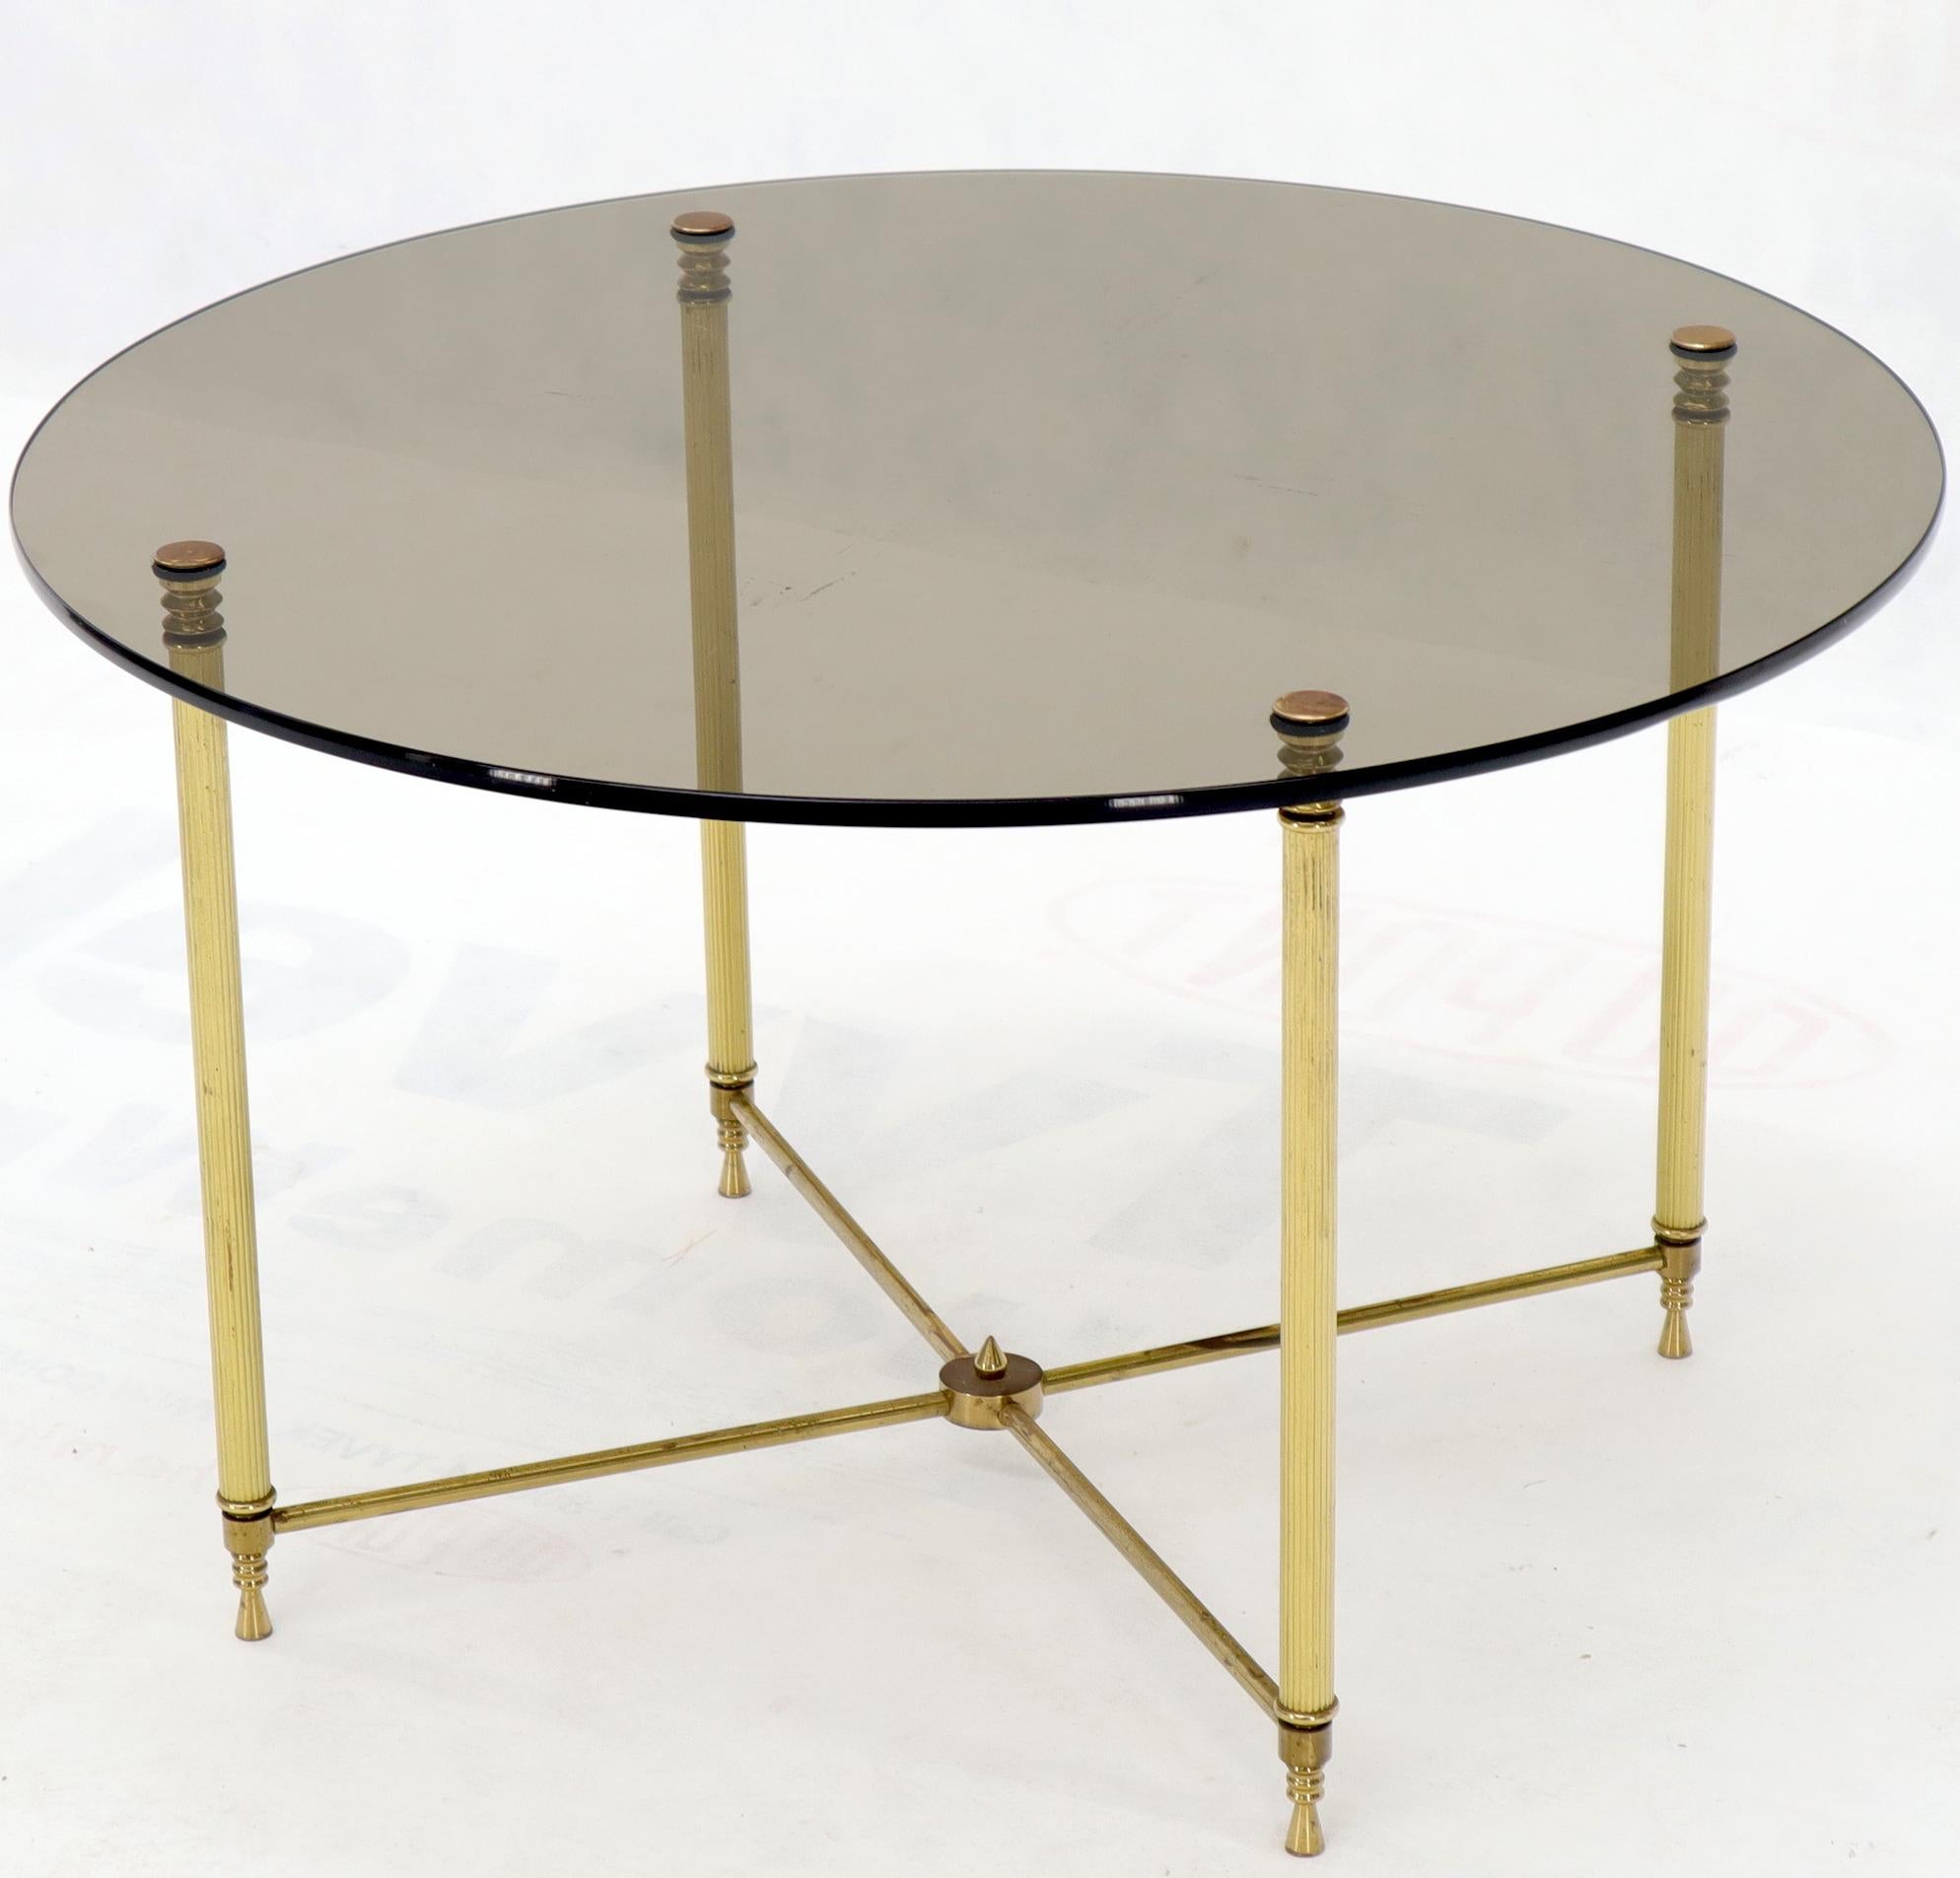 Polished Circular Round Smoked Glass Brass Legs Nesting Coffee Table For Sale